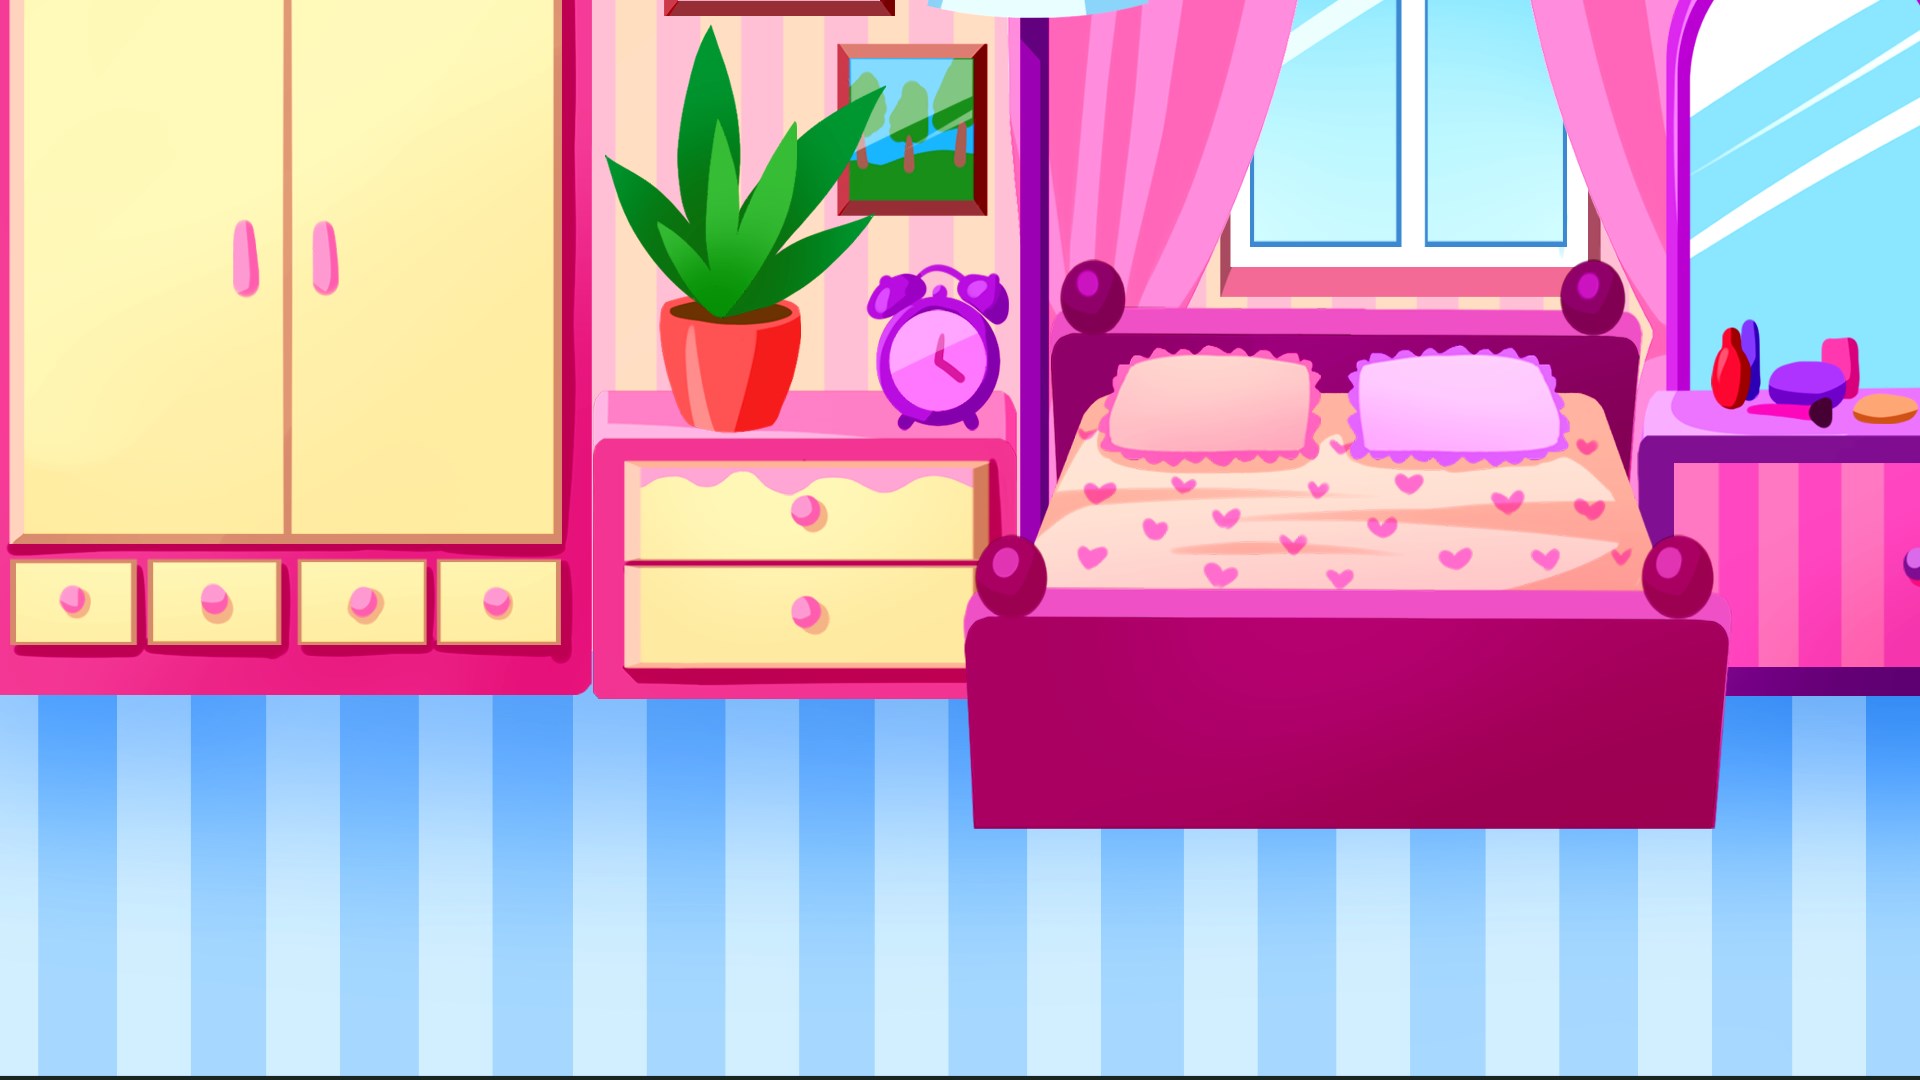 dollhouse makeover games